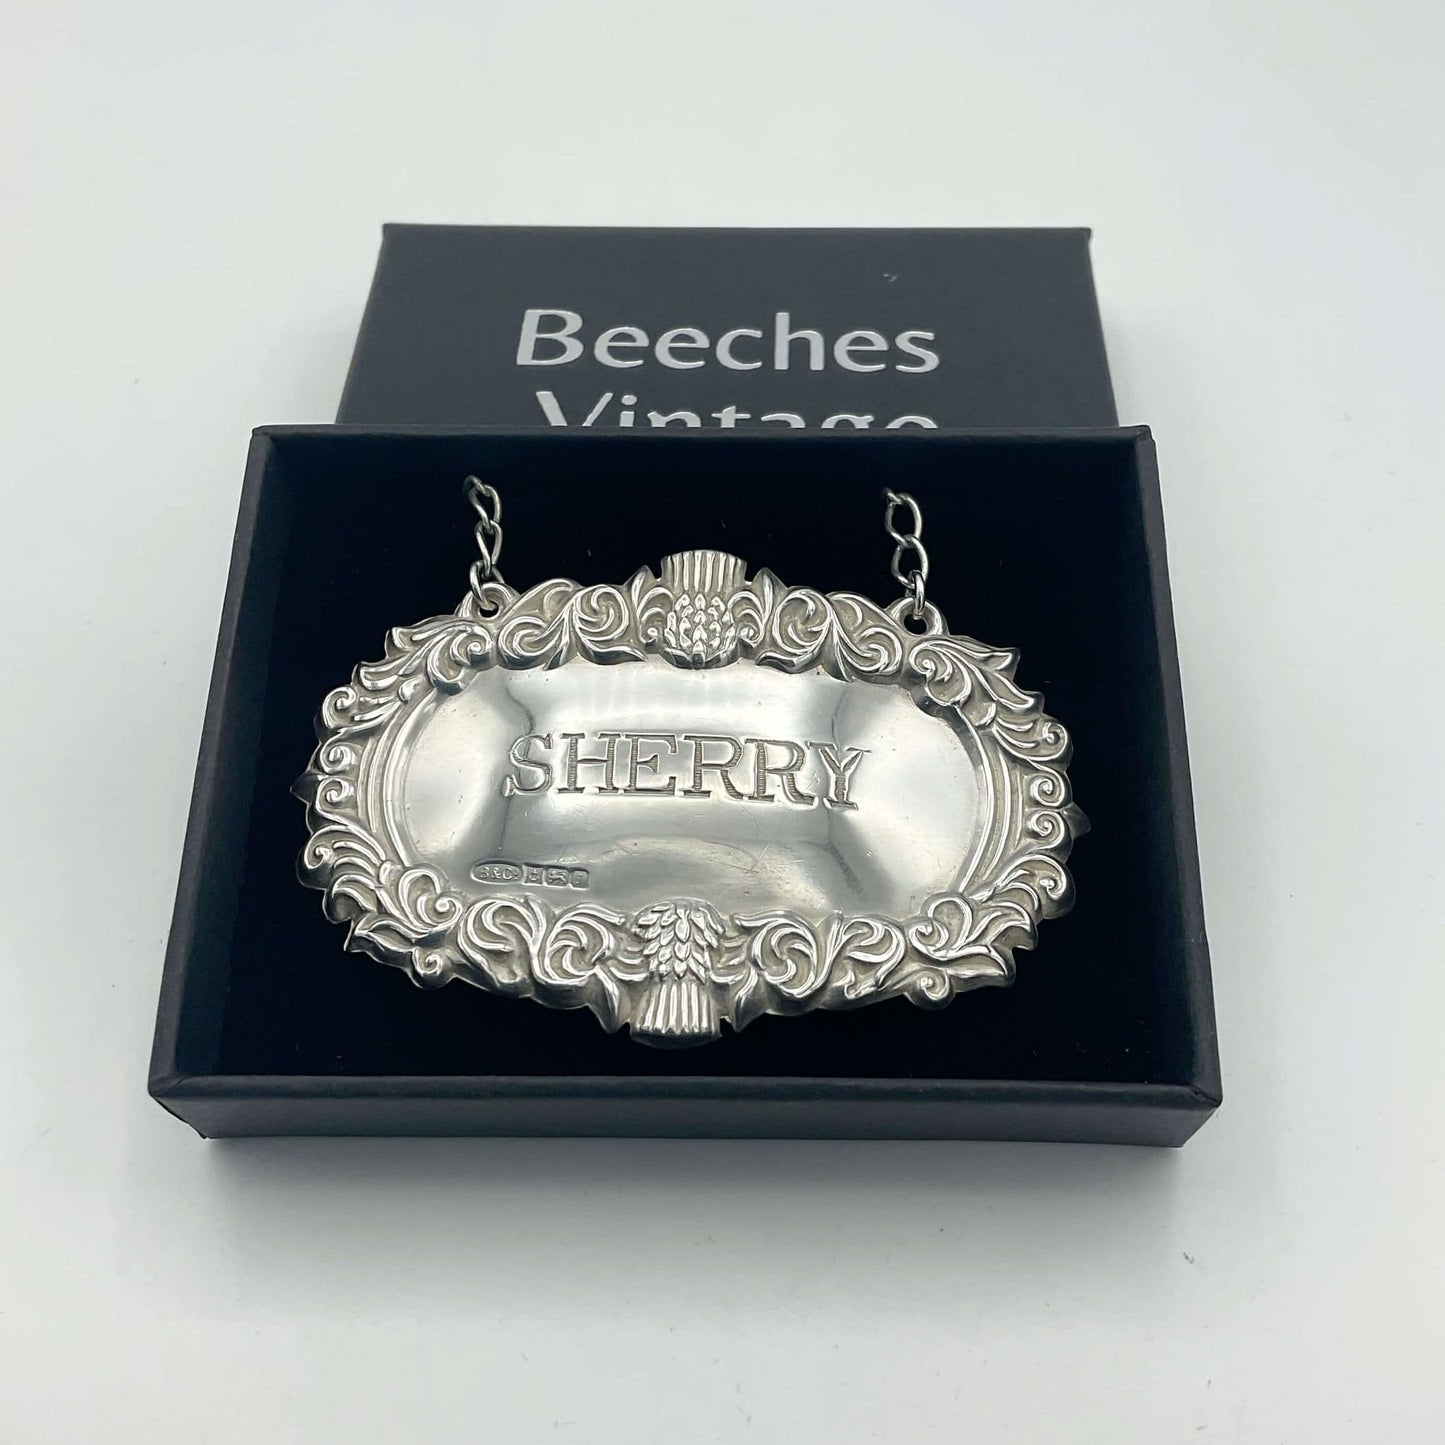 1983 Sterling Silver Sherry Decanter Label